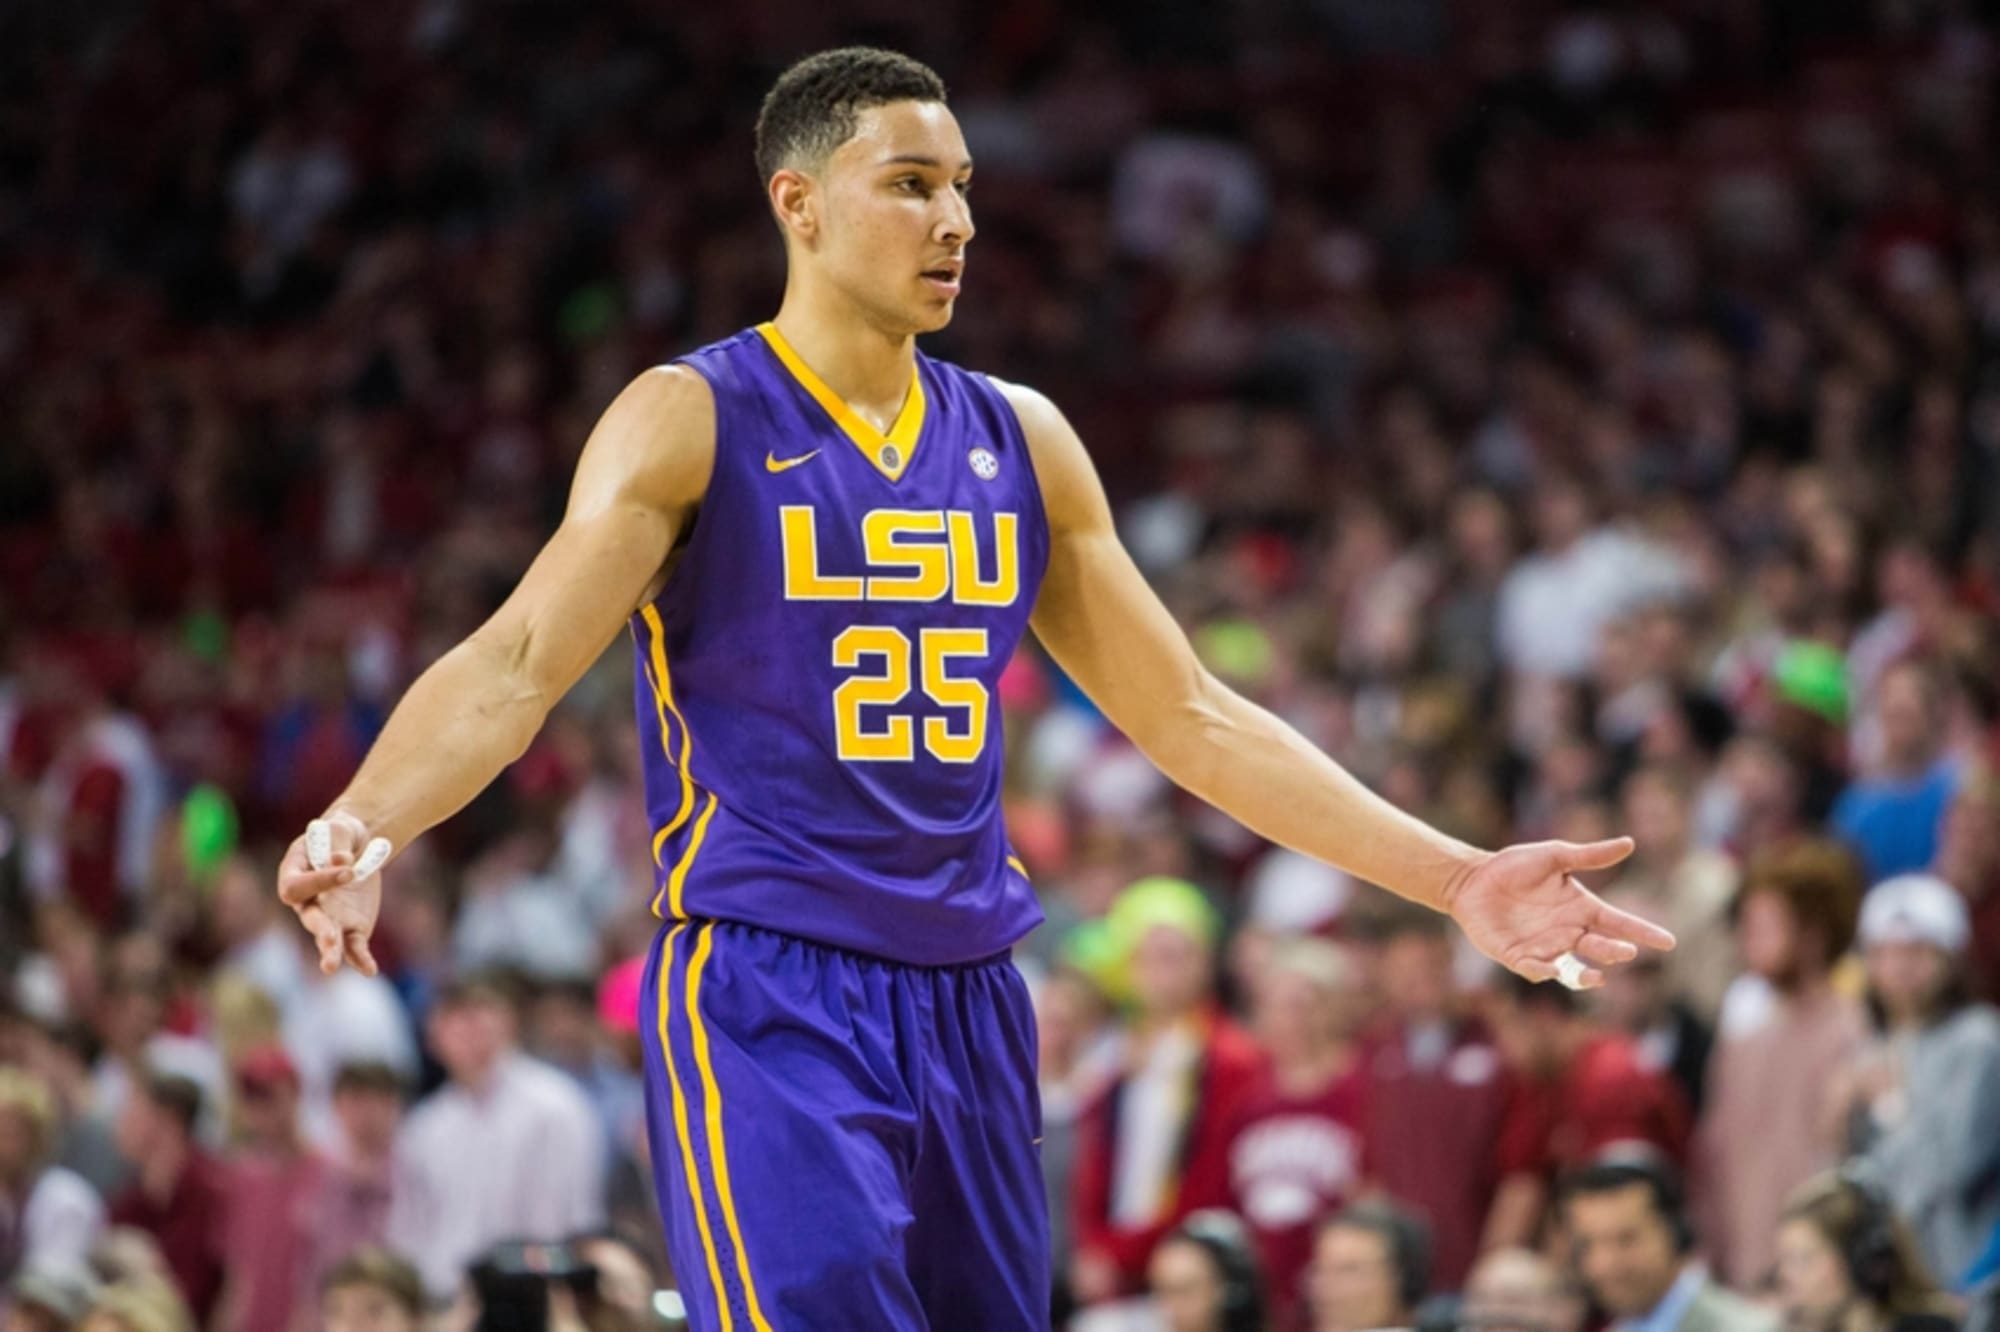 The REAL TRUTH why Ben Simmons won't shoot [AND HOW TO FIX IT